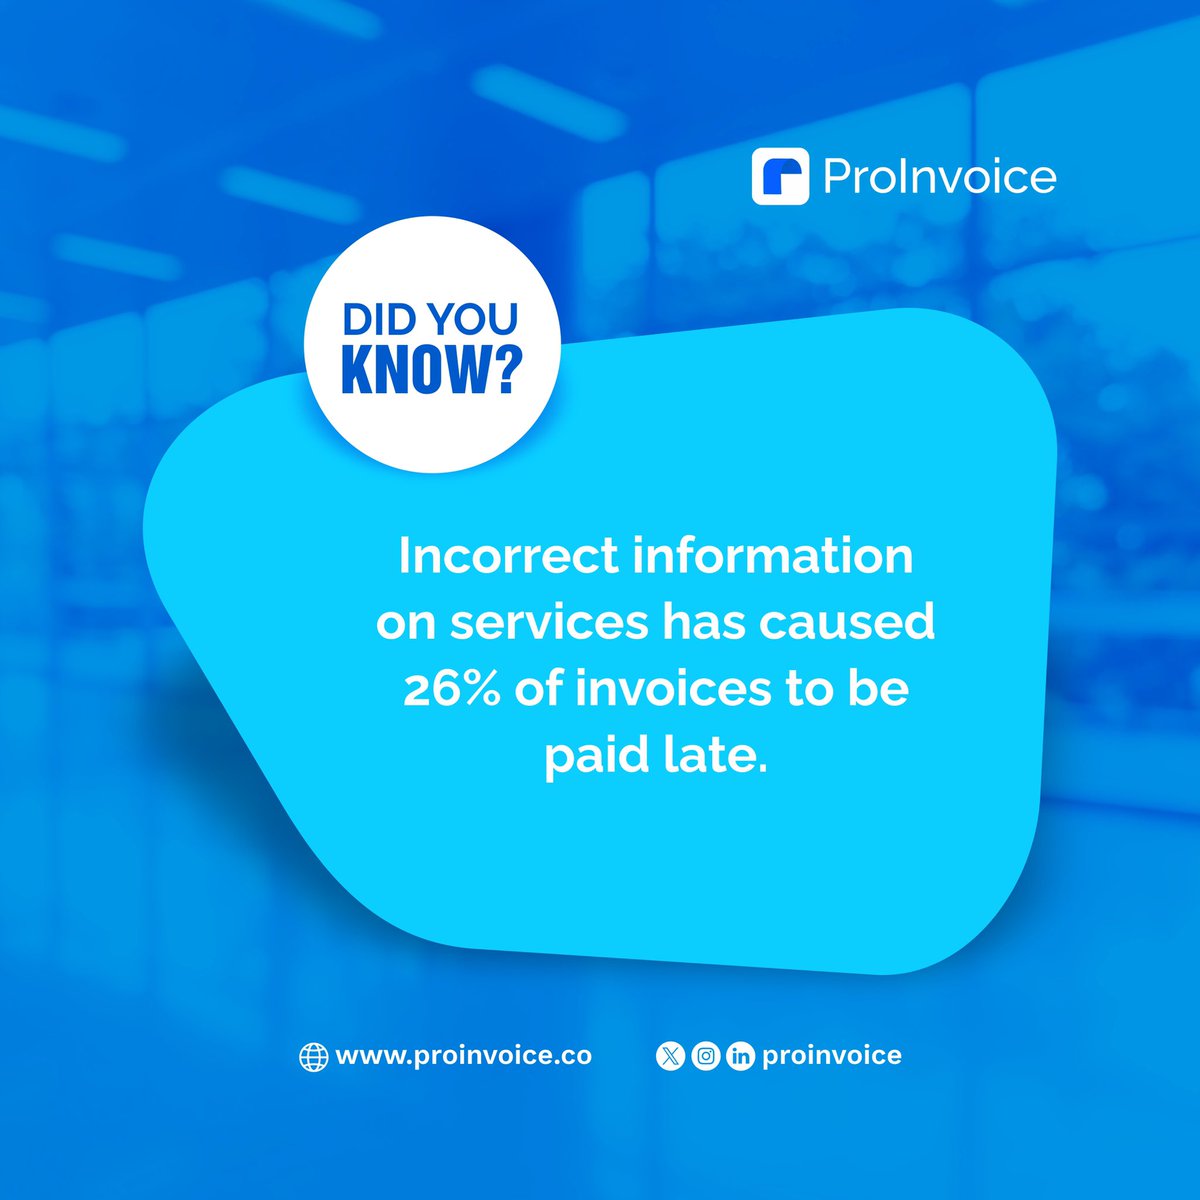 Always use accurate information on any invoice you send out to your customers/clients!! Take note! 

#InvoiceLikeAPro 
#proinvoice
#growwithproinvoice
#businessfact
#businesssupport
#supportsmallbusiness
#businessowners 
#businessgoals 
#businesstips
#InvoiceManagement